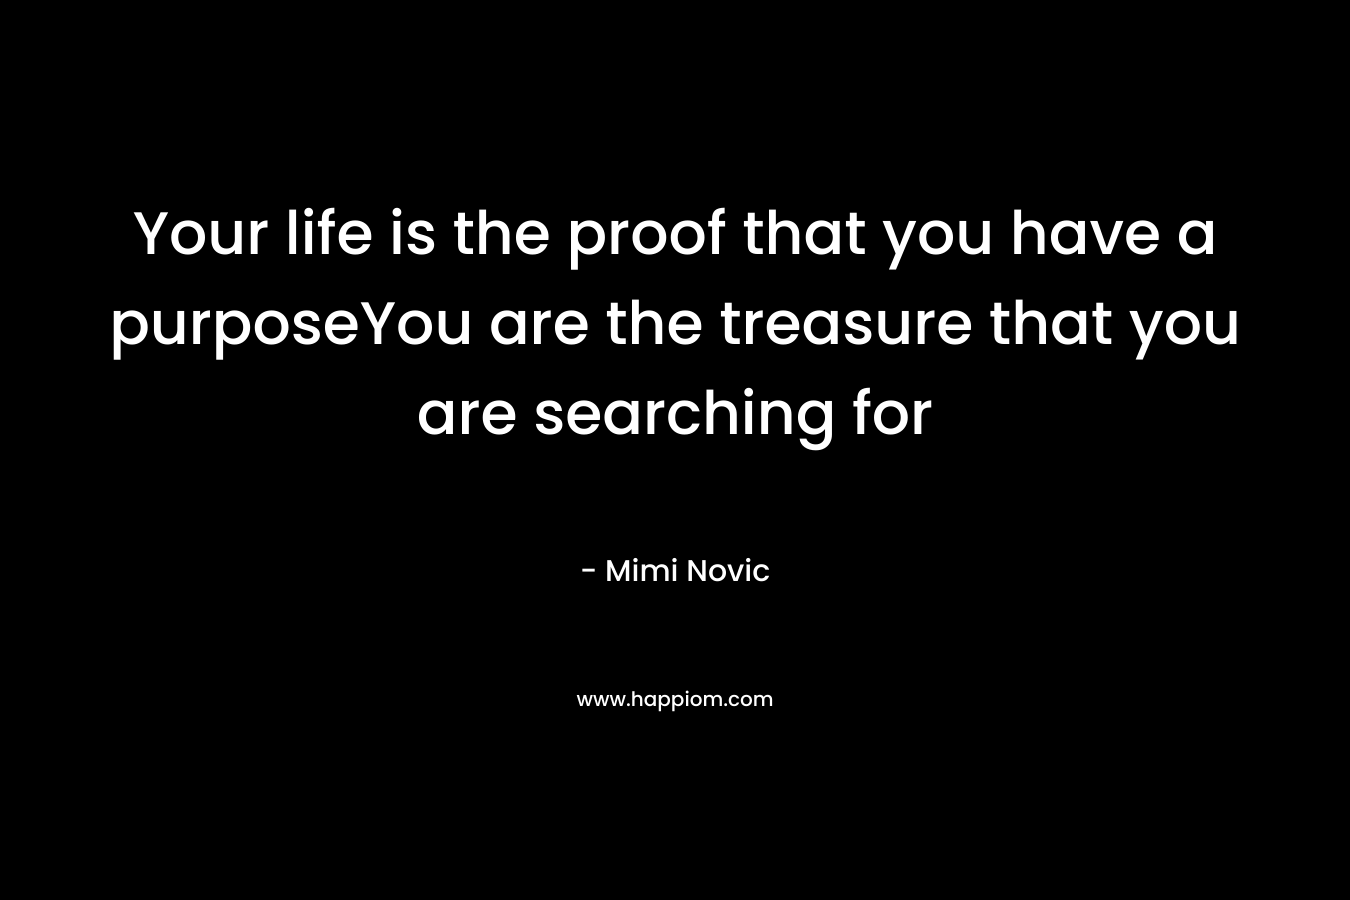 Your life is the proof that you have a purposeYou are the treasure that you are searching for – Mimi Novic